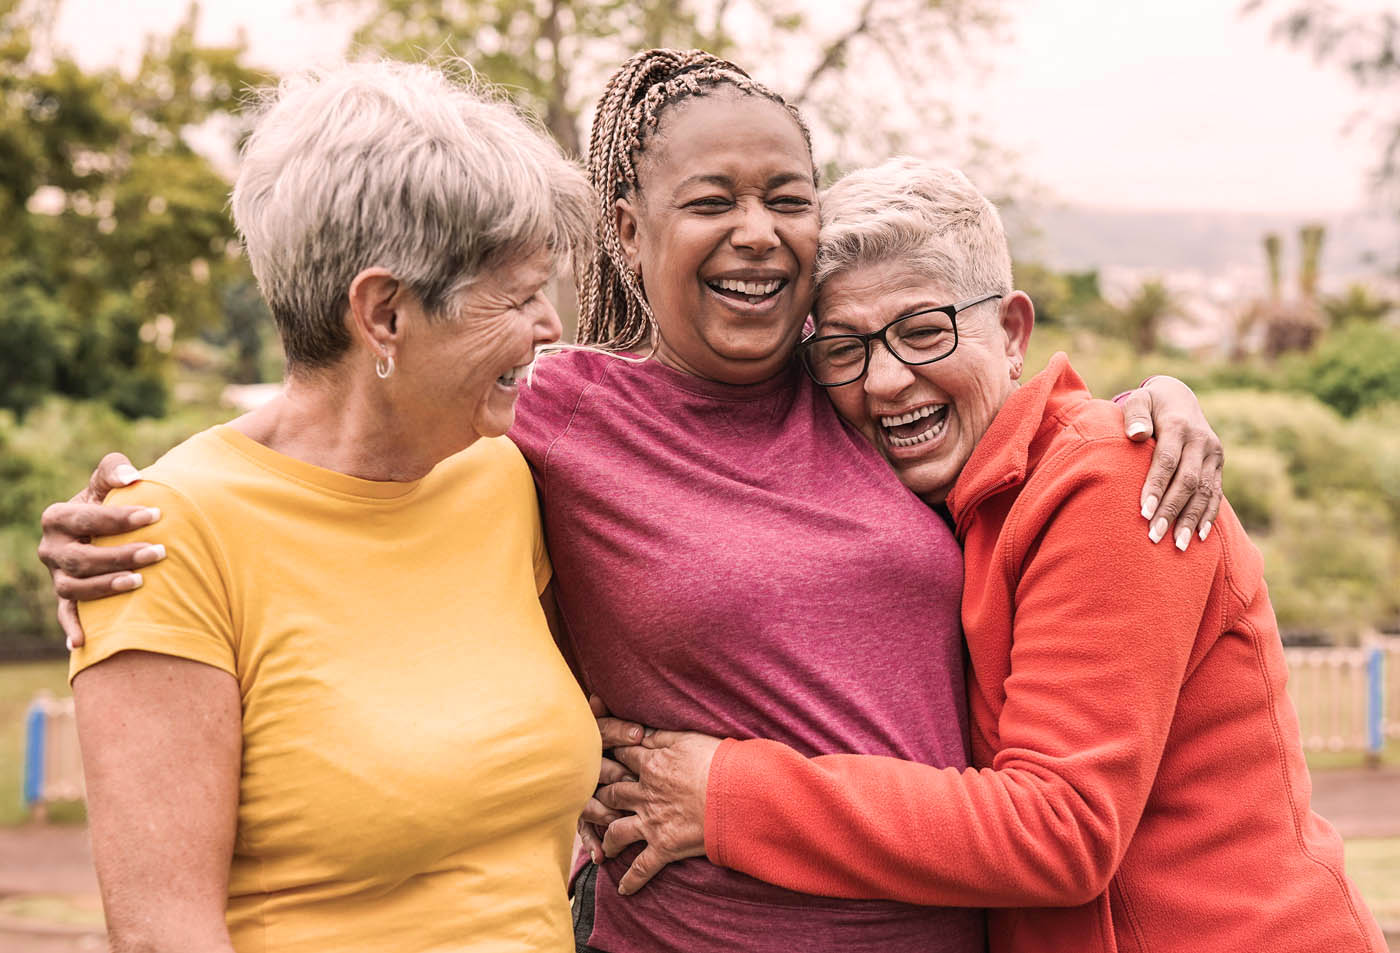 A group of elderly women laughing and hugging each other - discover multiple sclerosis pain treatment today.